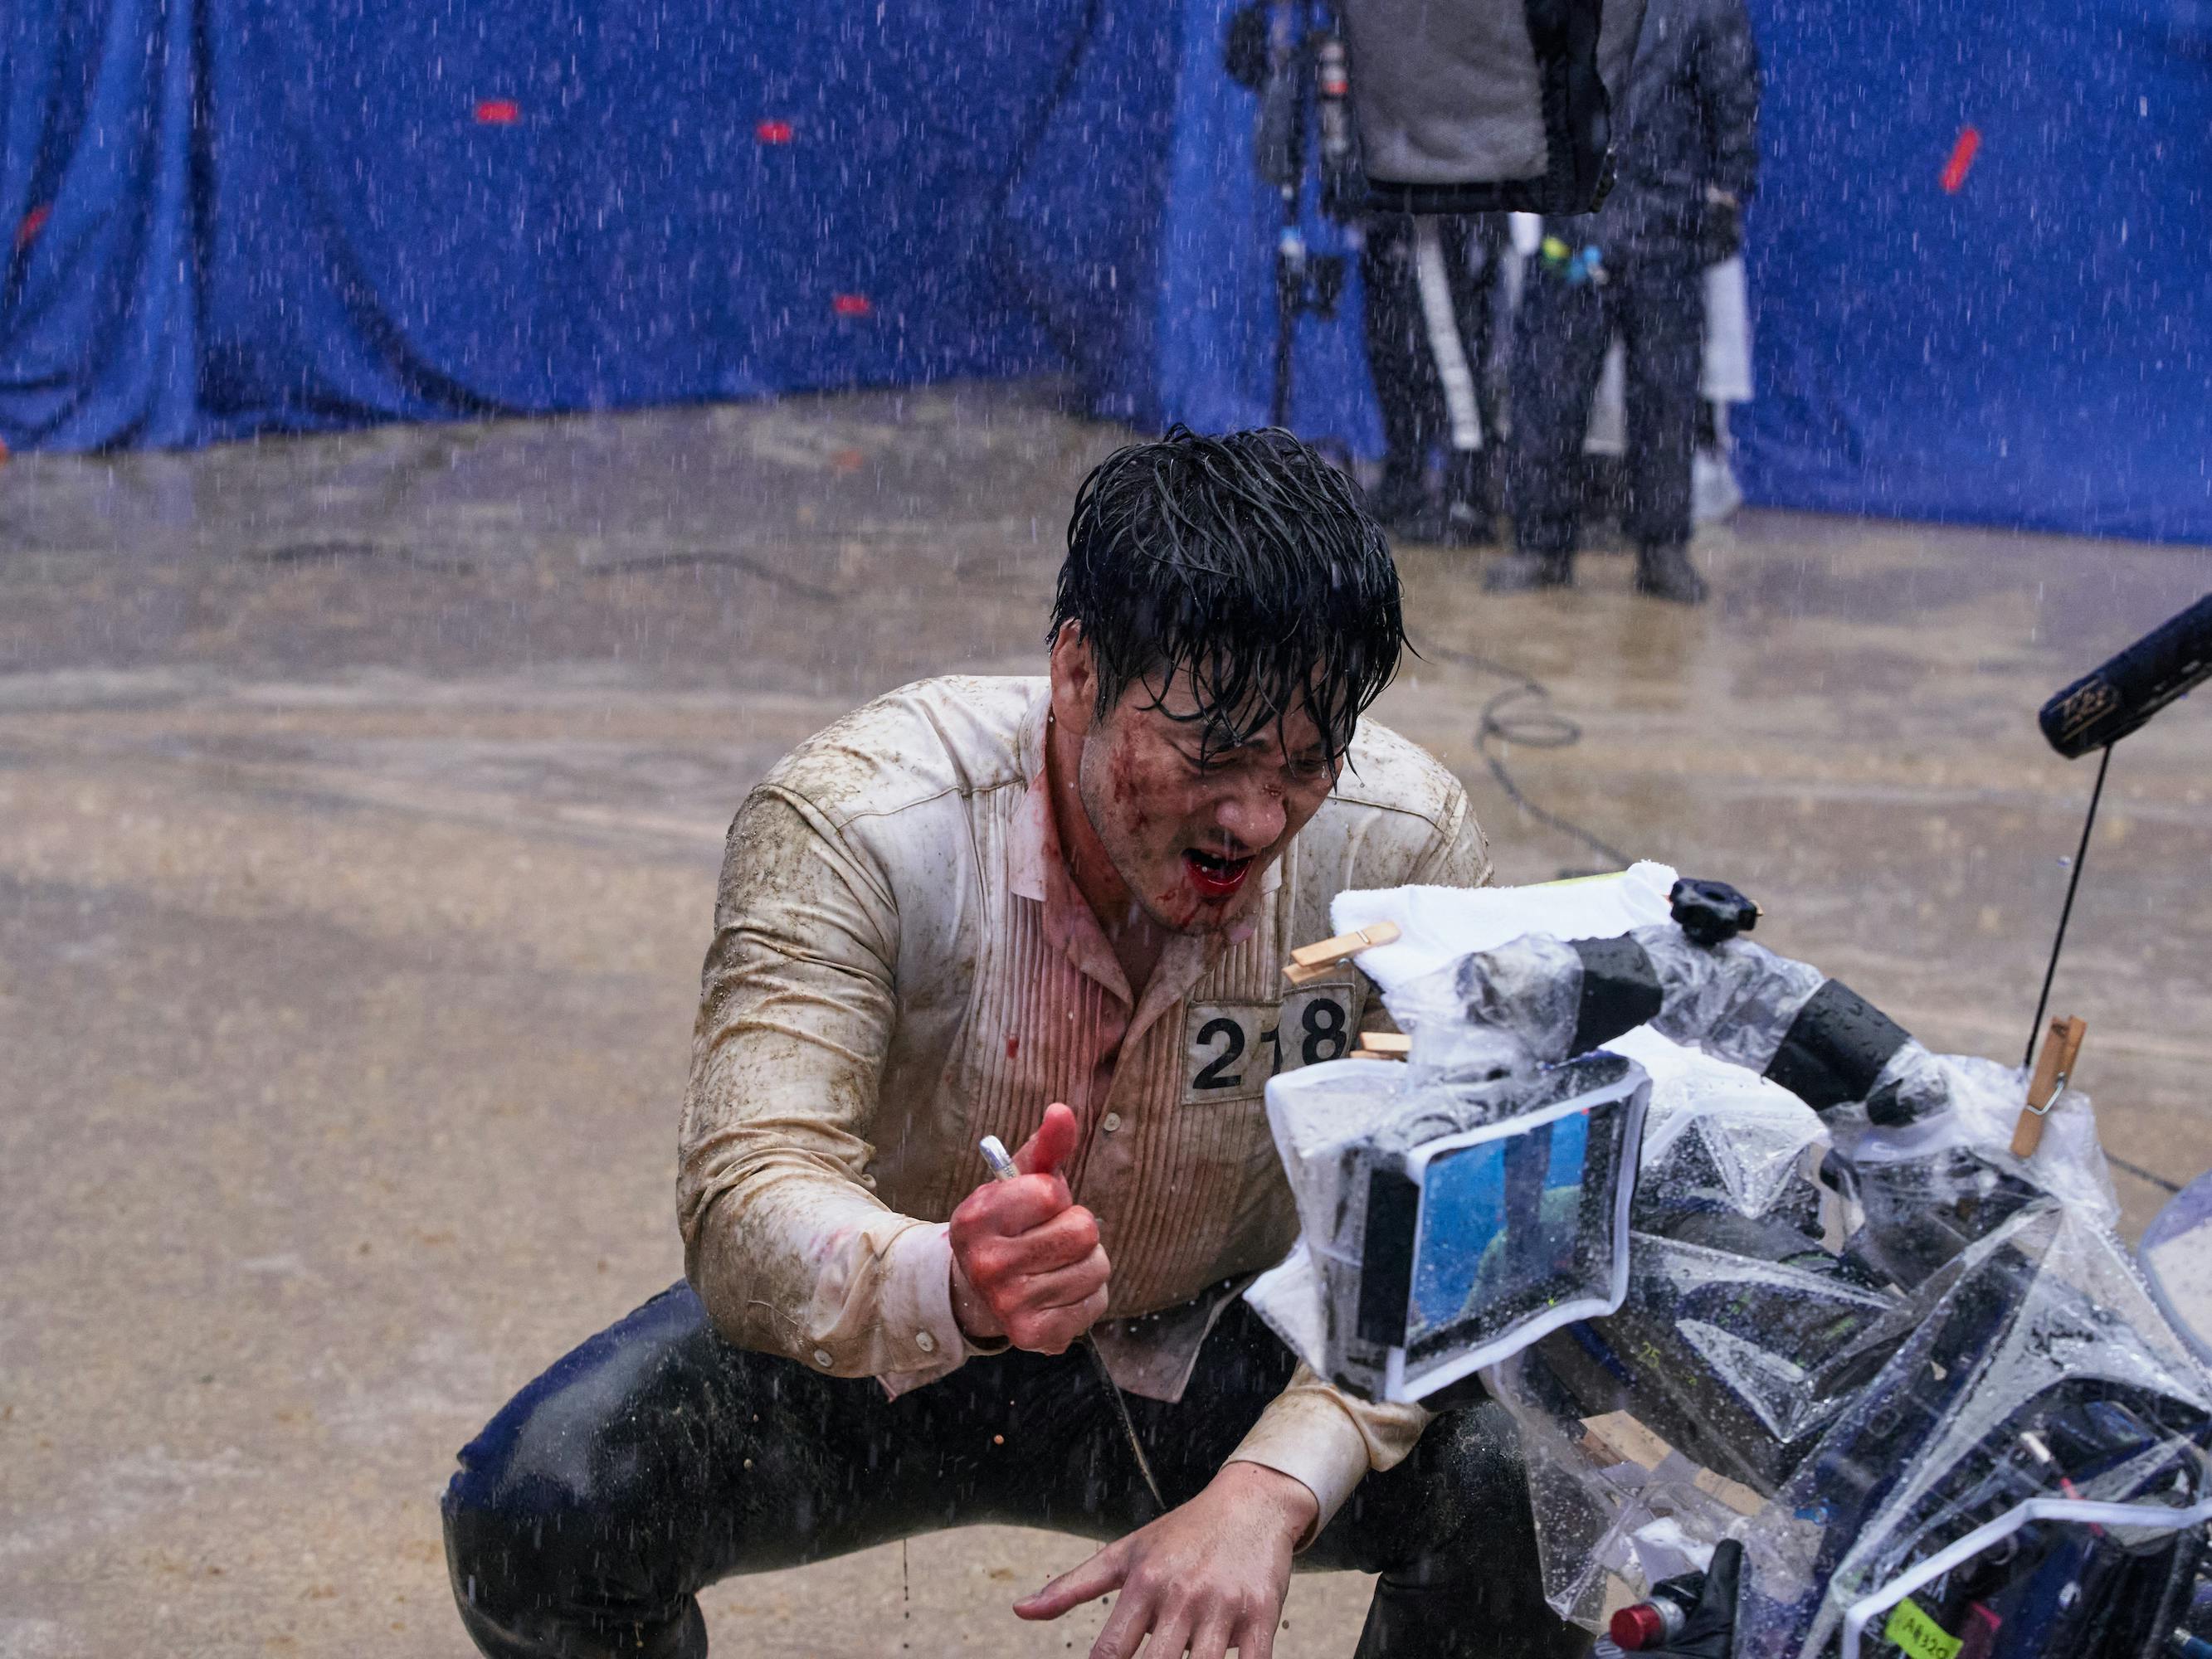 Cho Sang-woo (Park Hae-soo) squints in the rain. He faces a camera rig and looks wet and bloody.